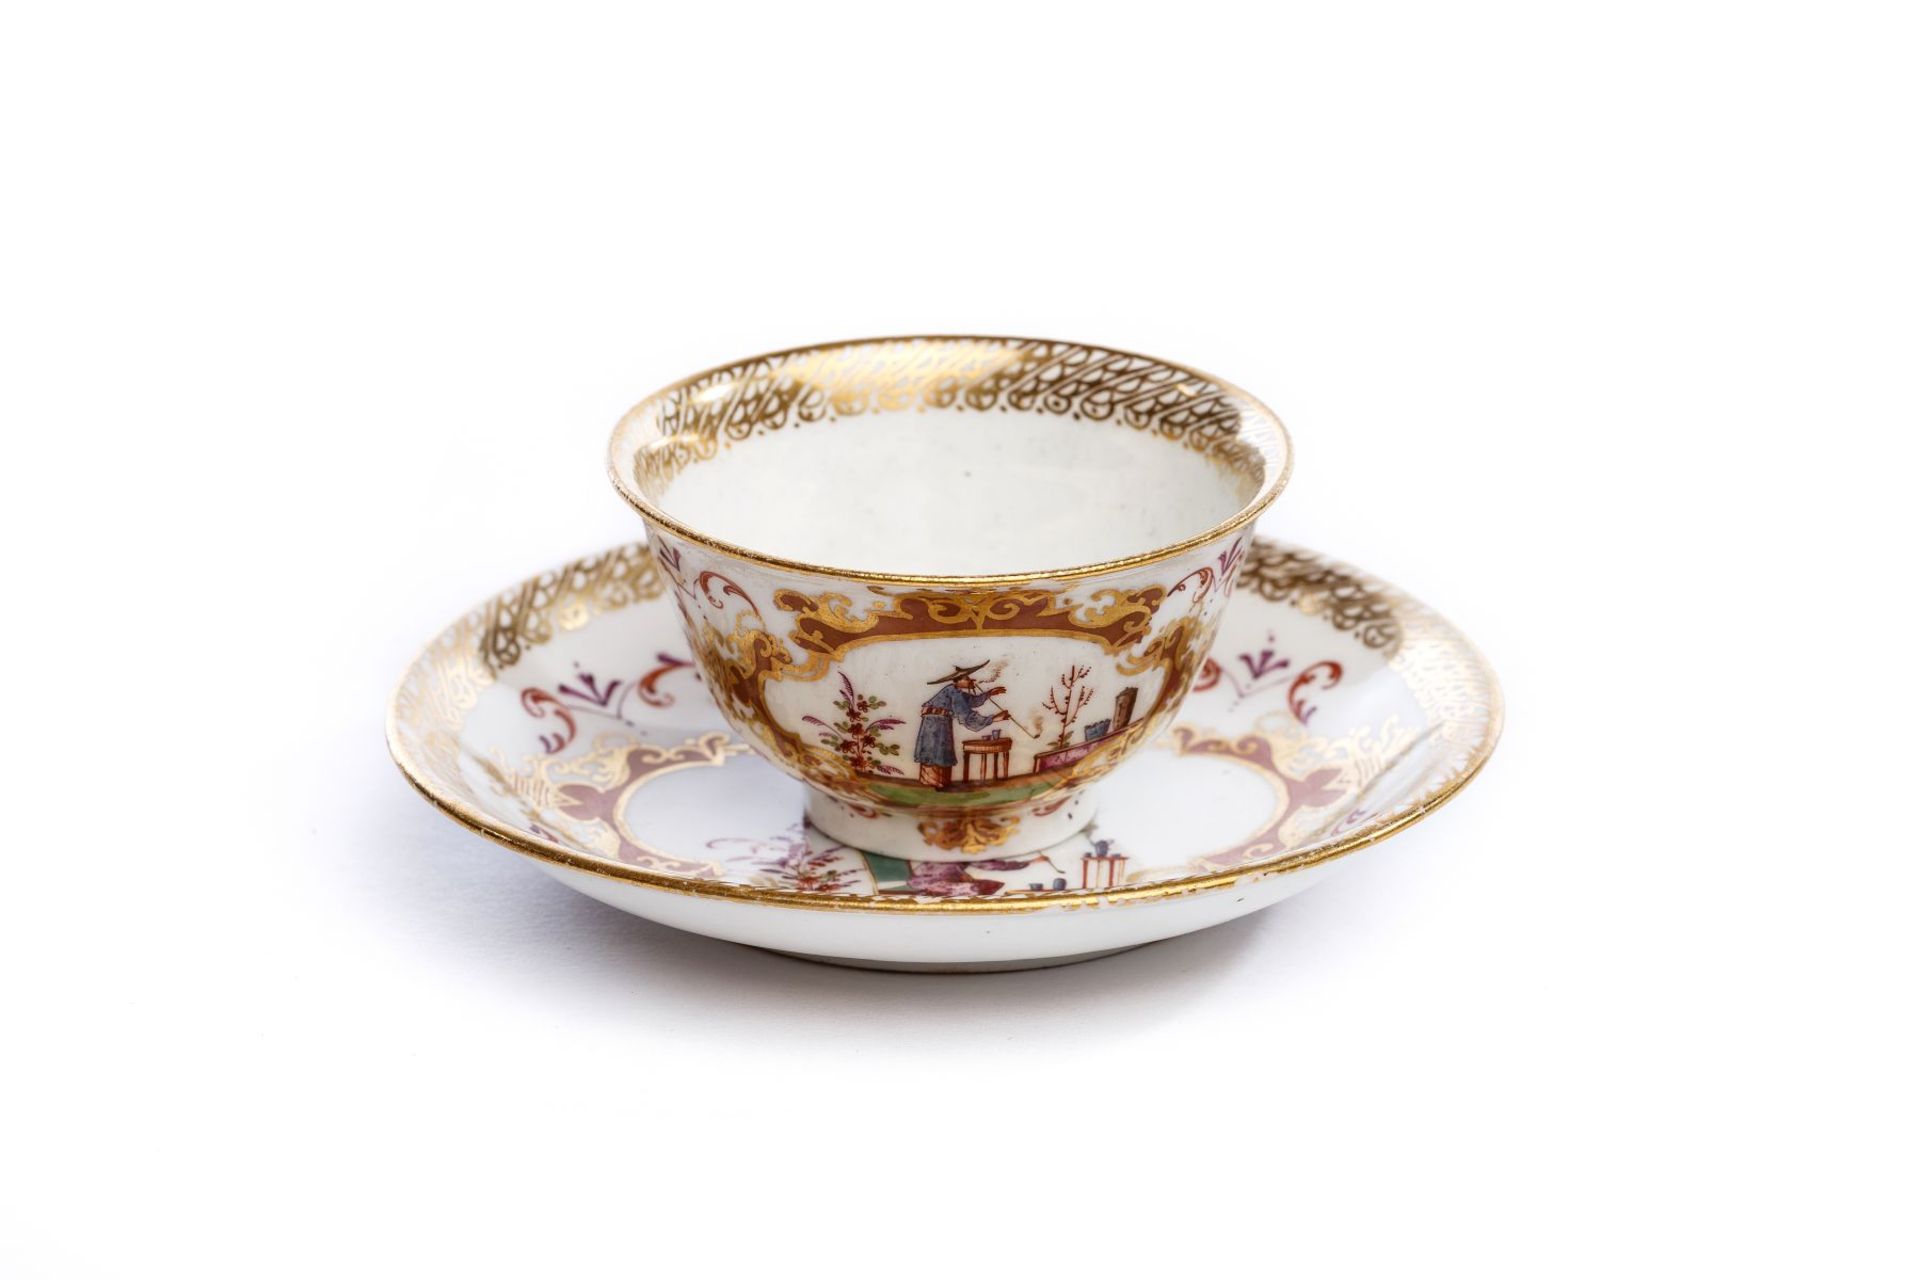 Bowl with Saucer, Meissen 1723/25 - Image 4 of 6